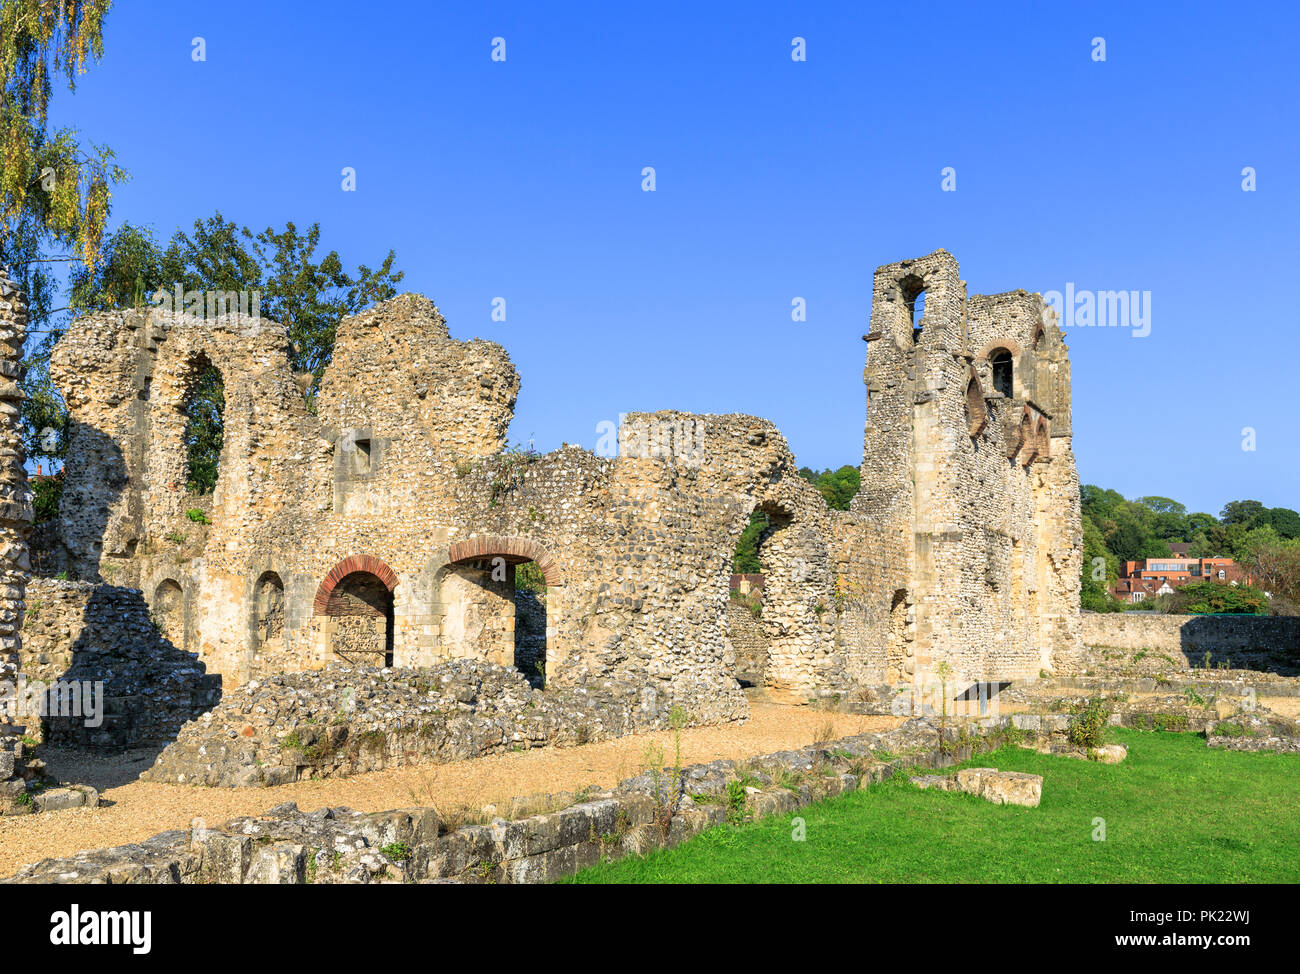 Ruins of ancient medieval Wolvesey Castle (Old Bishop's Palace) in Winchester, Hampshire, southern England, UK on a bright sunny day with blue sky Stock Photo